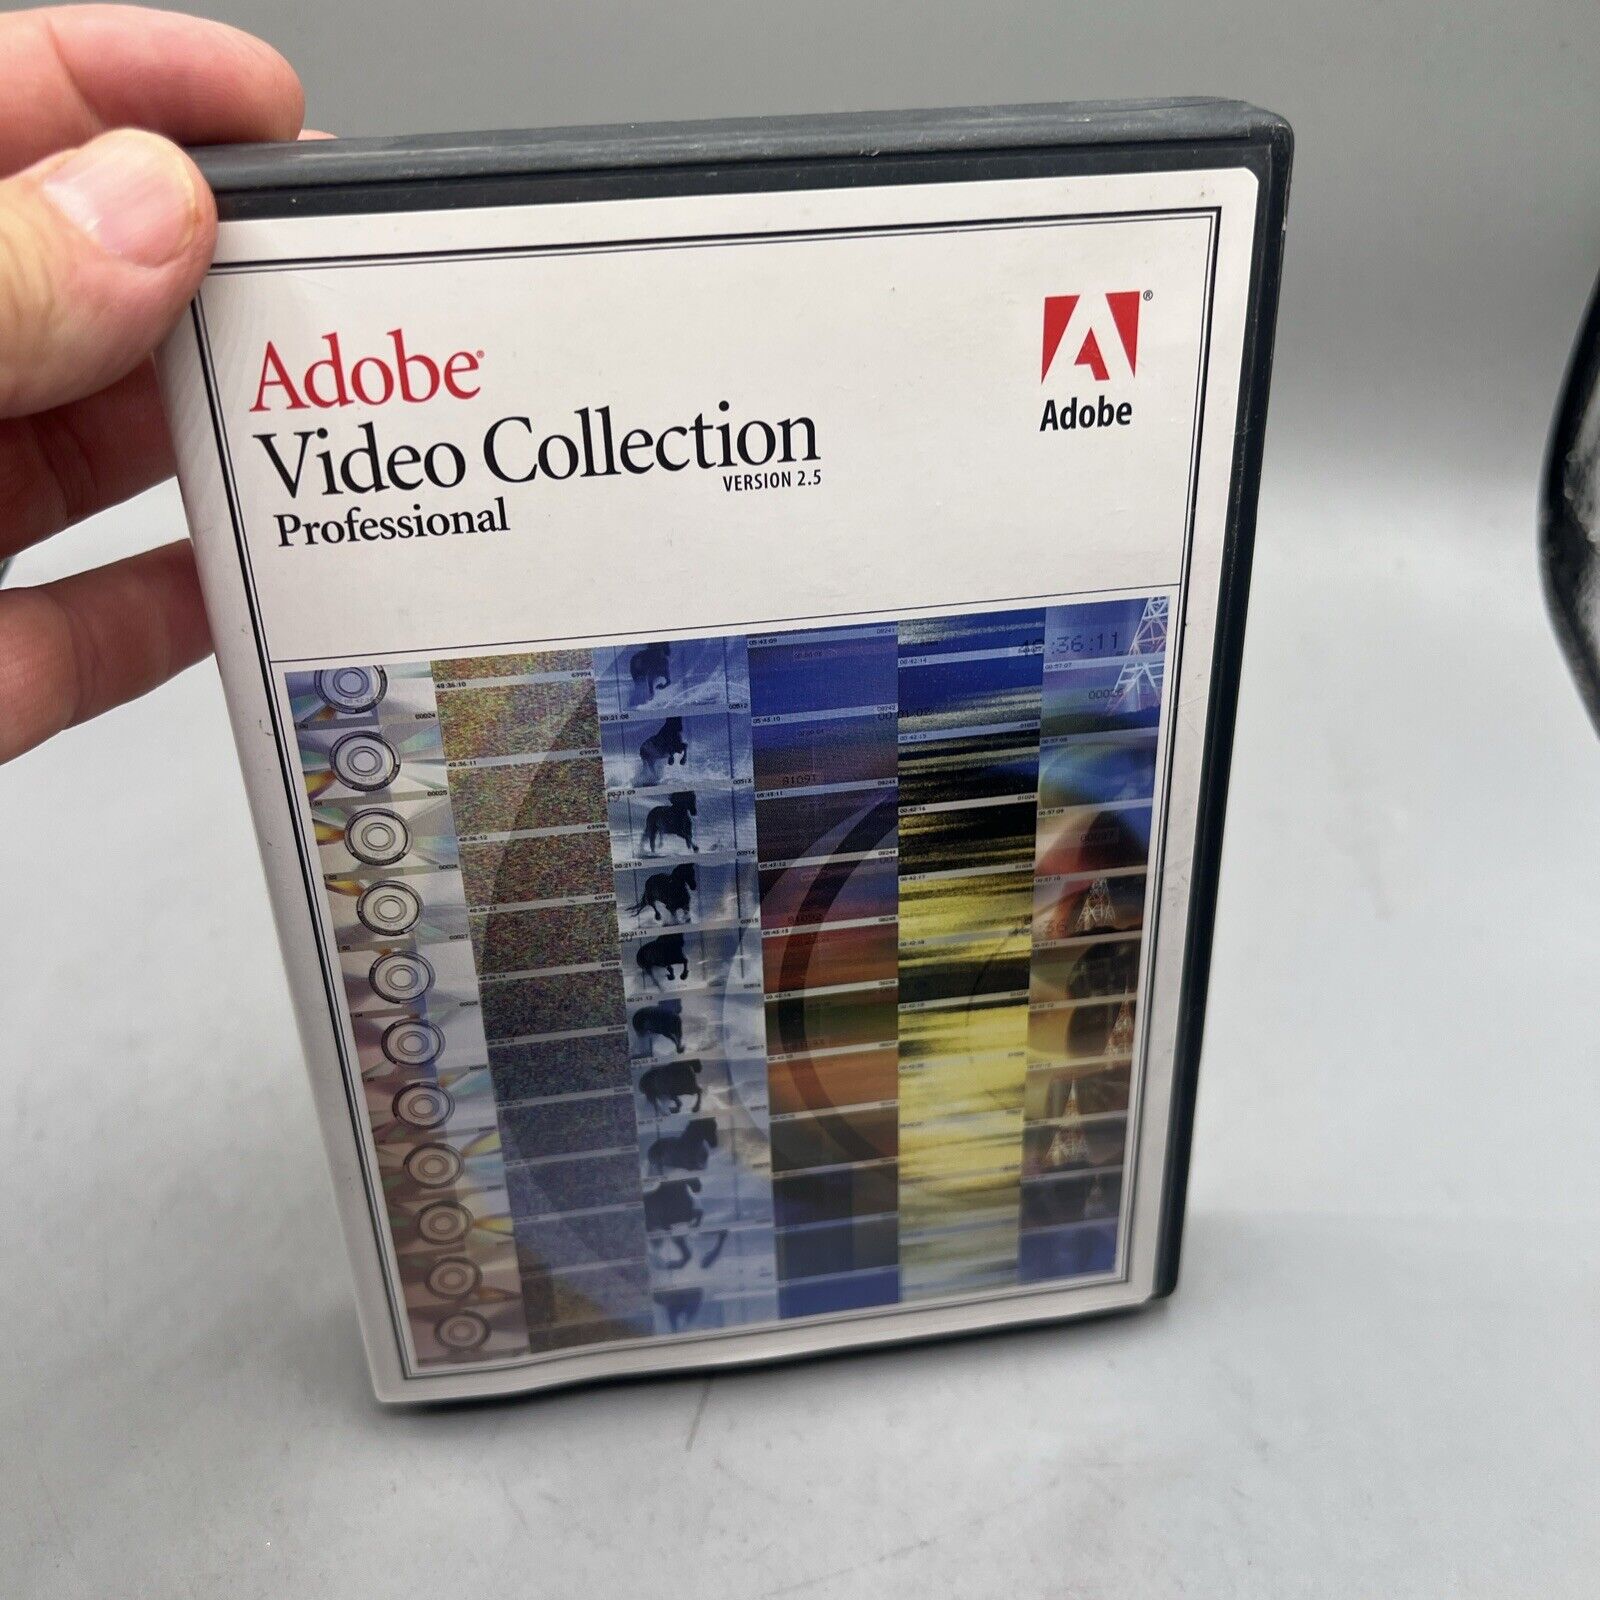 Adobe Video Collection Standard Version 2.5 - CD's & serial numbers + EXTRAS